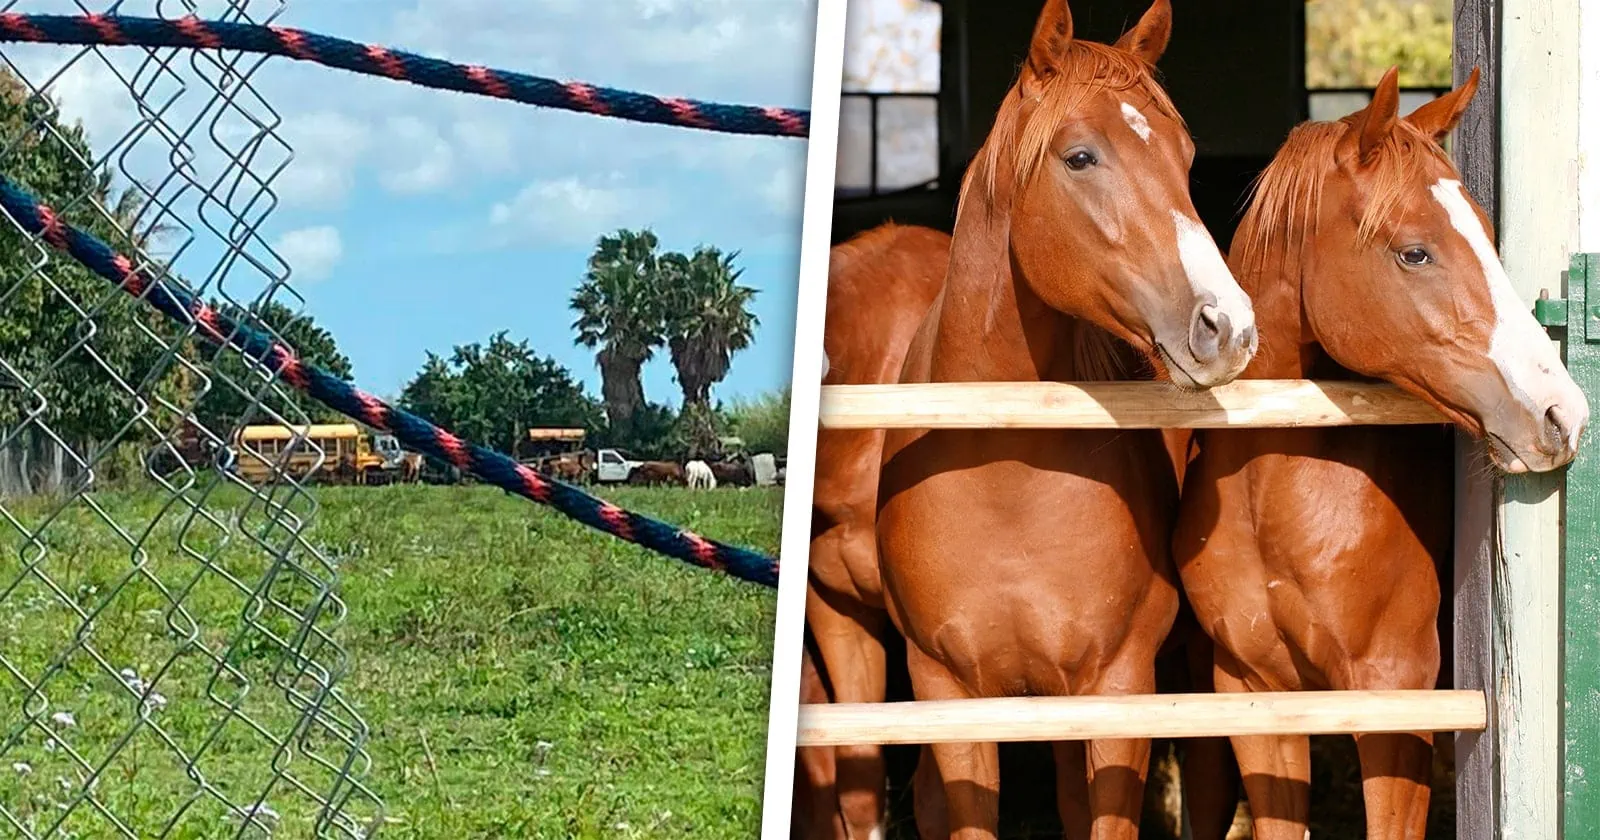 Theft and Slaughter of Horses in Miami-Dade Local Police Ask for Help to Find the Culprits